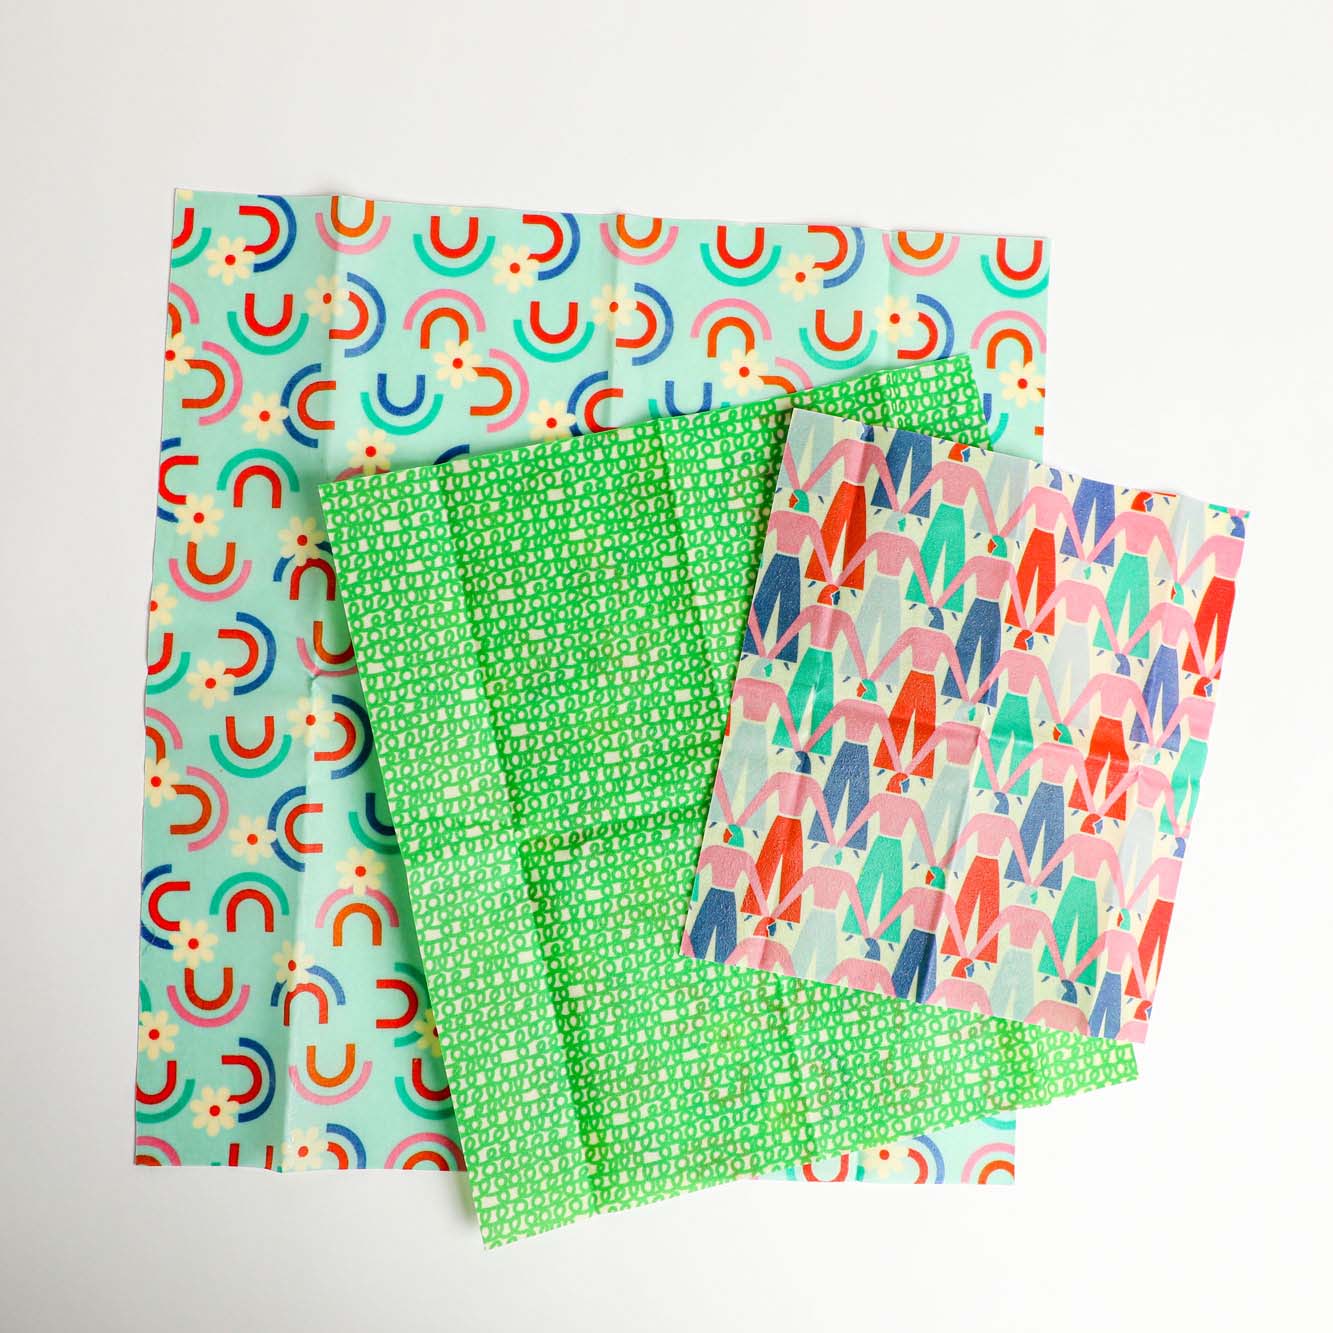 Beeswax Food Wraps - Let's Link Arms Set, Organic Cotton, gives to World Central Kitchen